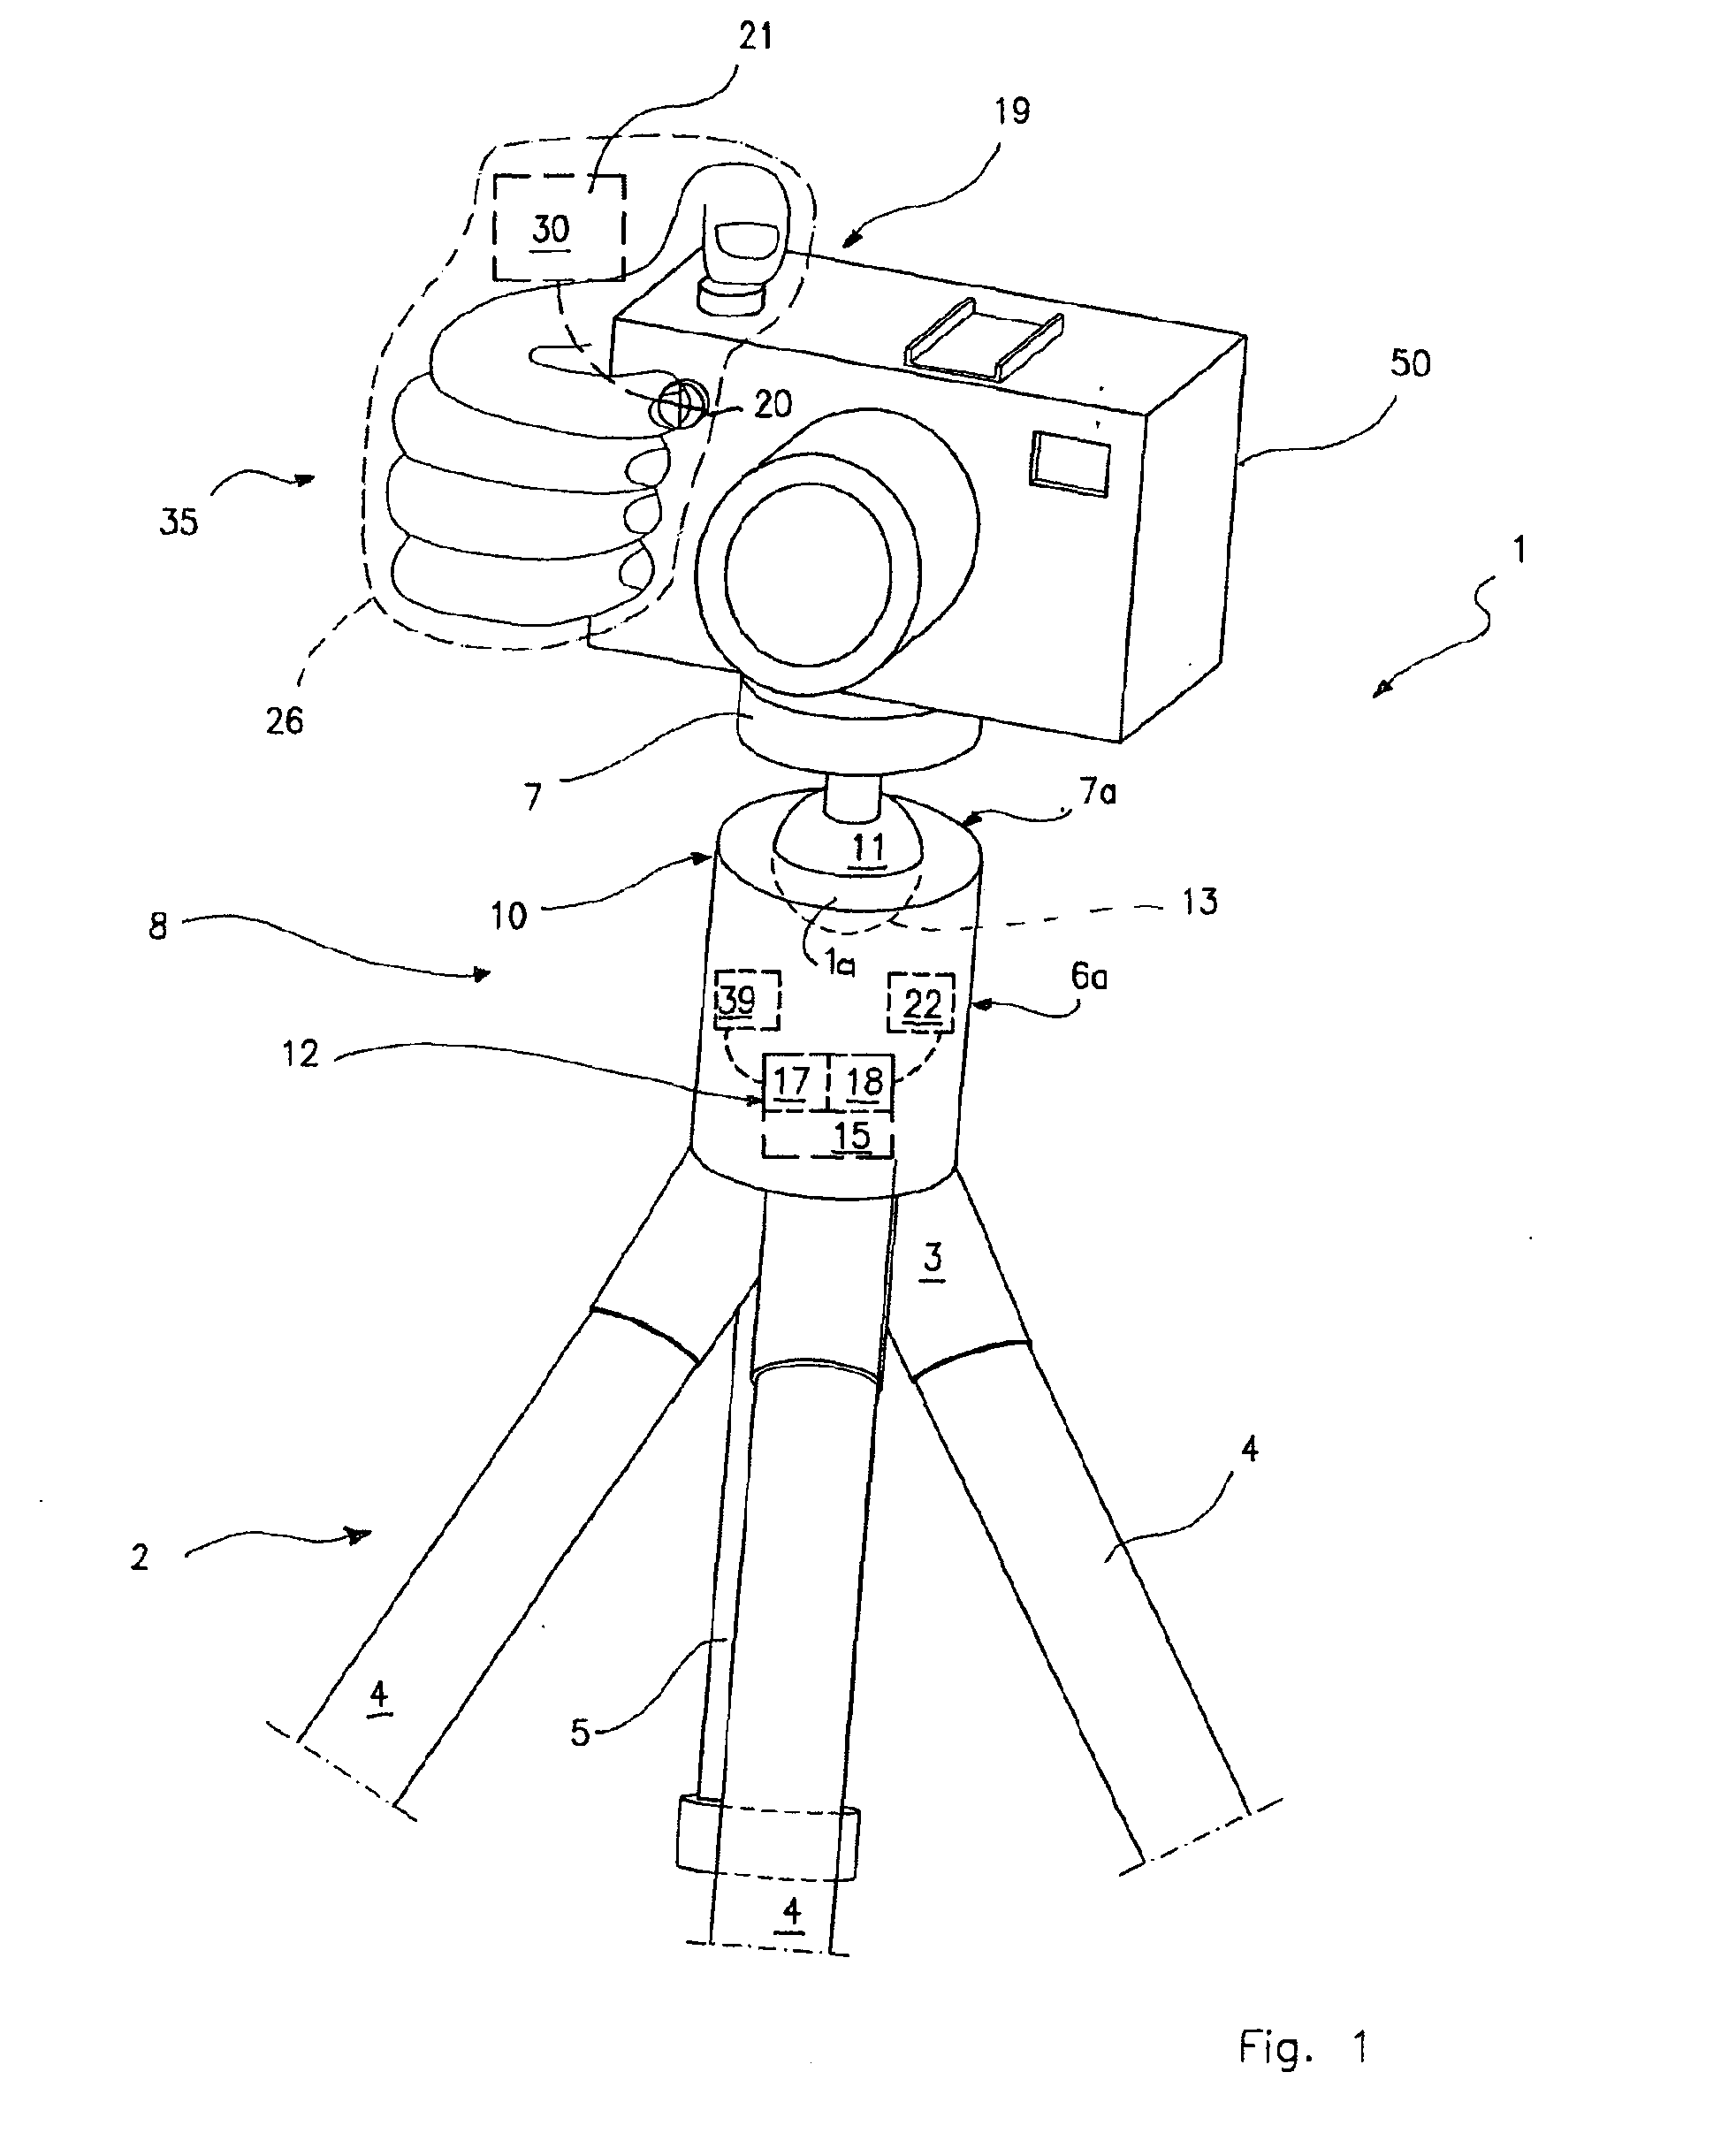 System for the Remote Control of Setting Up a Supporting Head for Optical and/or Photo-Cinematographic Equipment